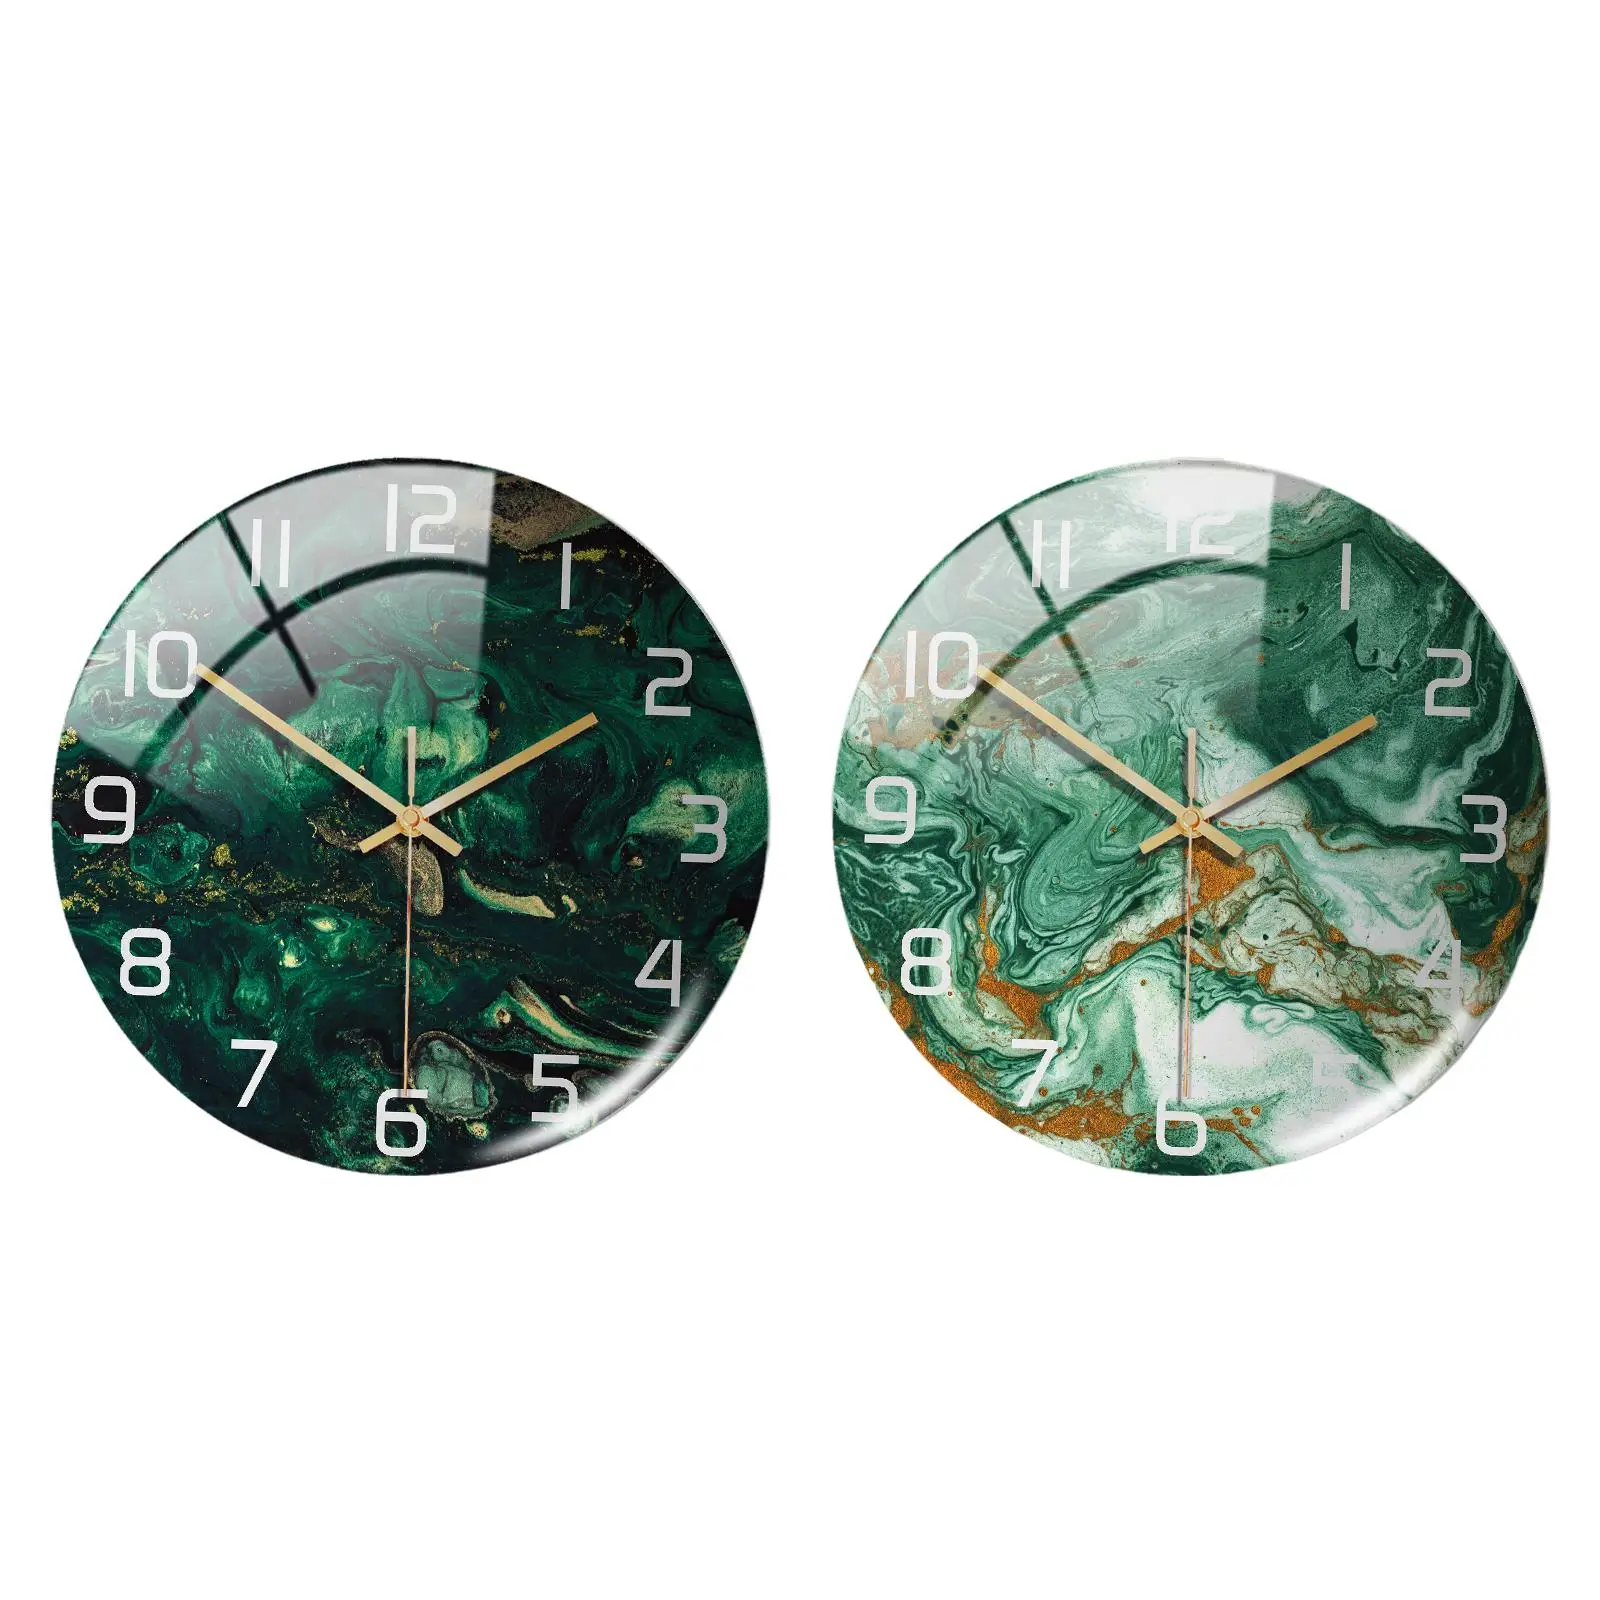 Decorative Wall Clock Marbling Battery Operated Quartz Acrylic Non Ticking Analog Round for Bathroom Living Room Home Kitchen